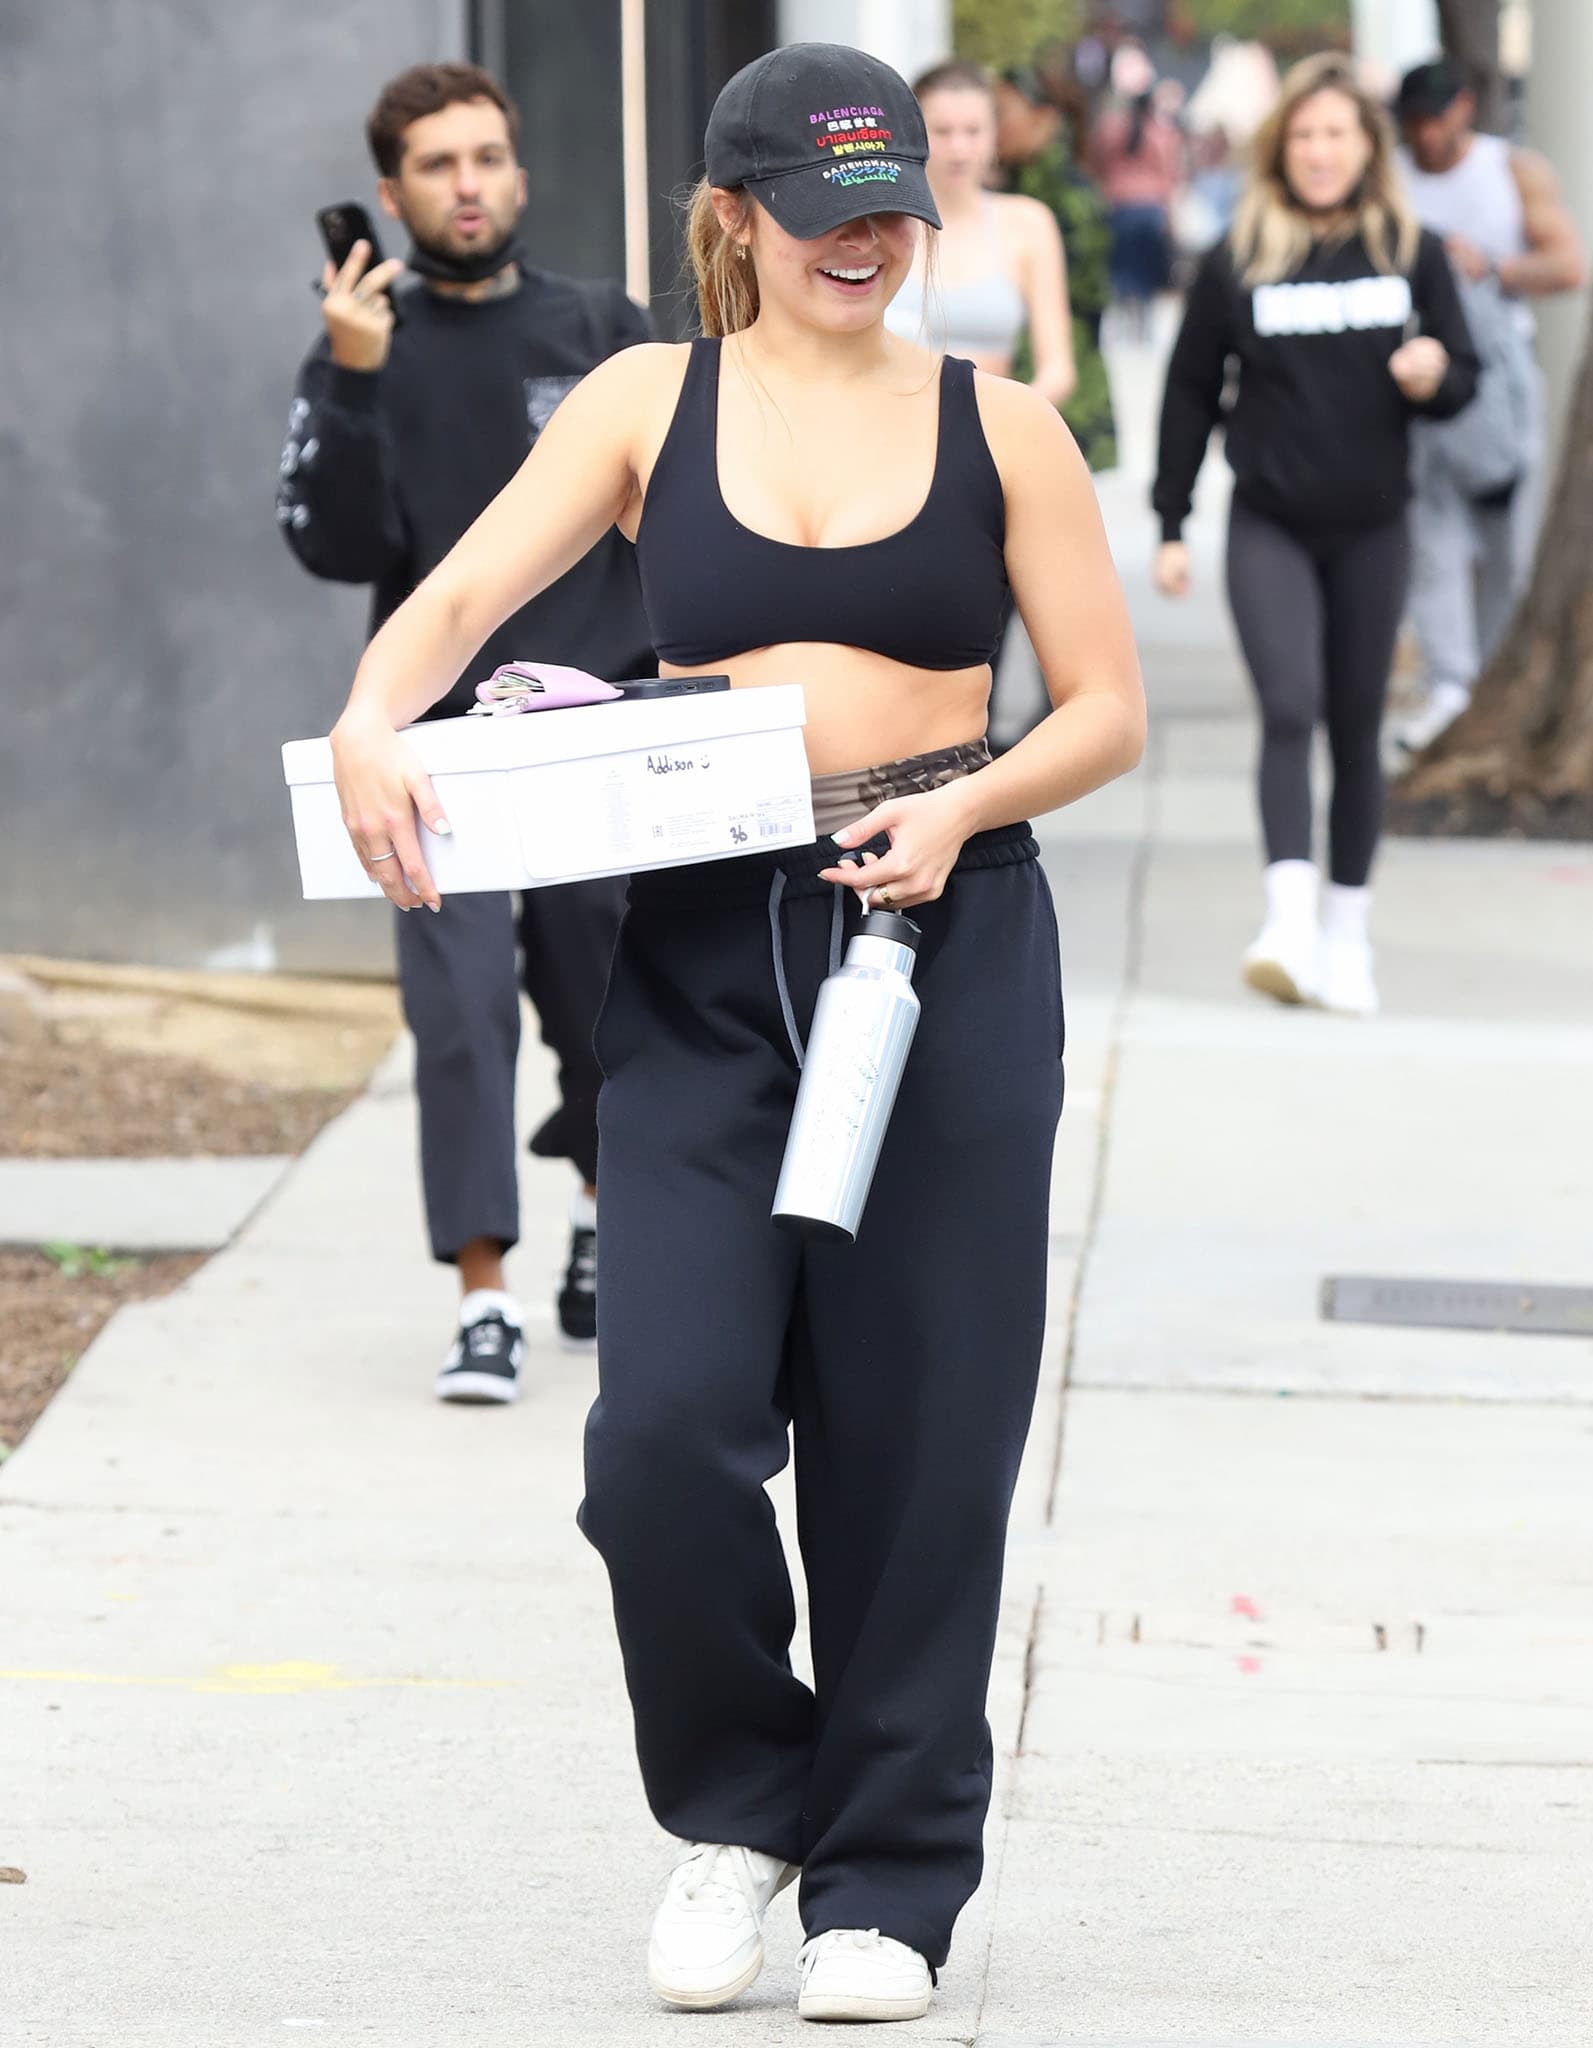 Addison Rae shows off her stomach and cleavage as she leaves Dogpound gym in West Hollywood on January 17, 2022